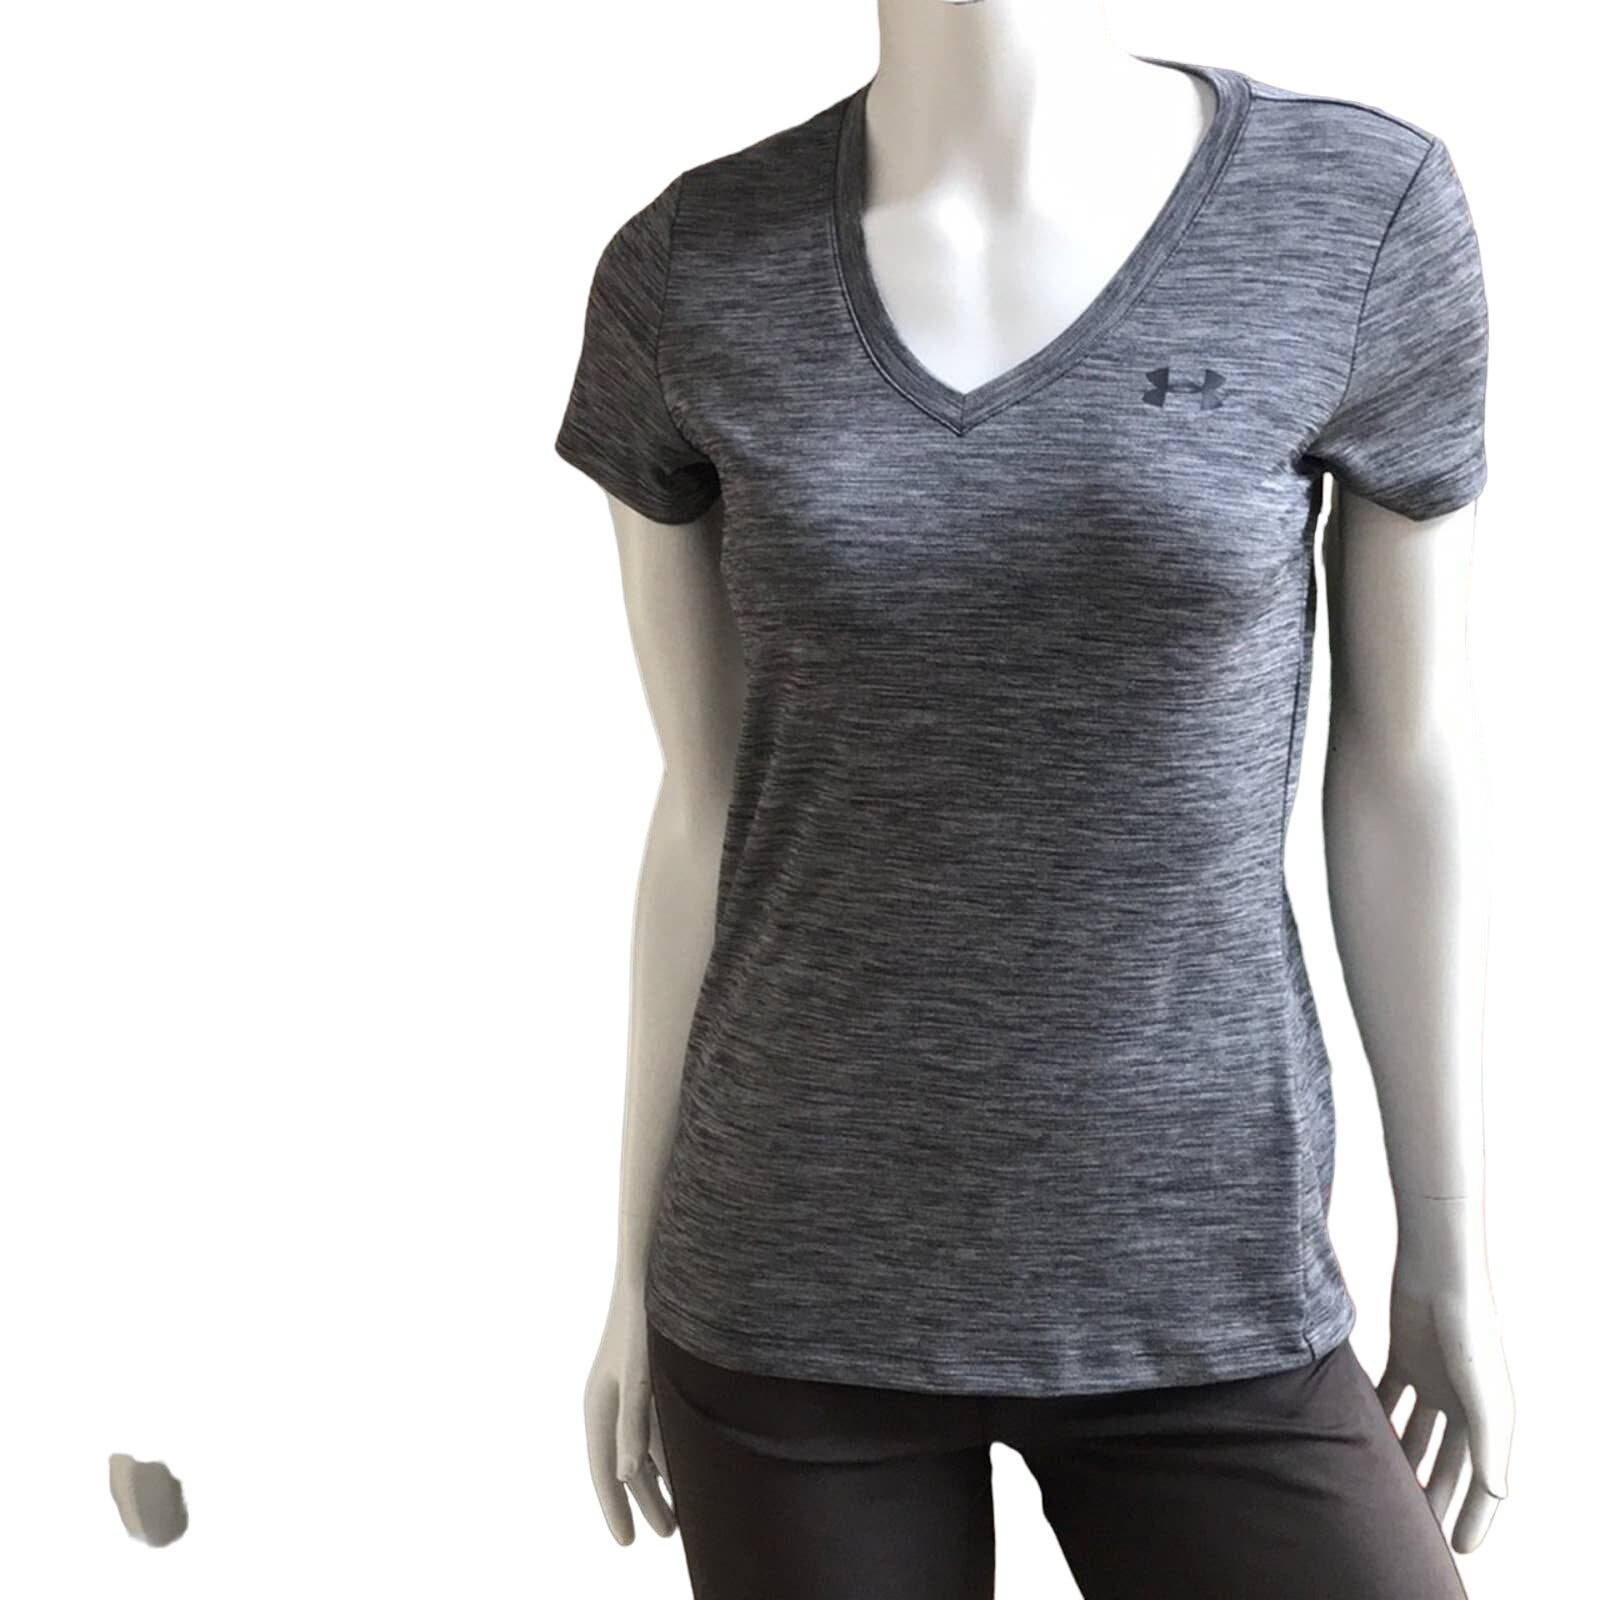 Special offer  Under Armour Loose Heat Gear Gray V-Neck